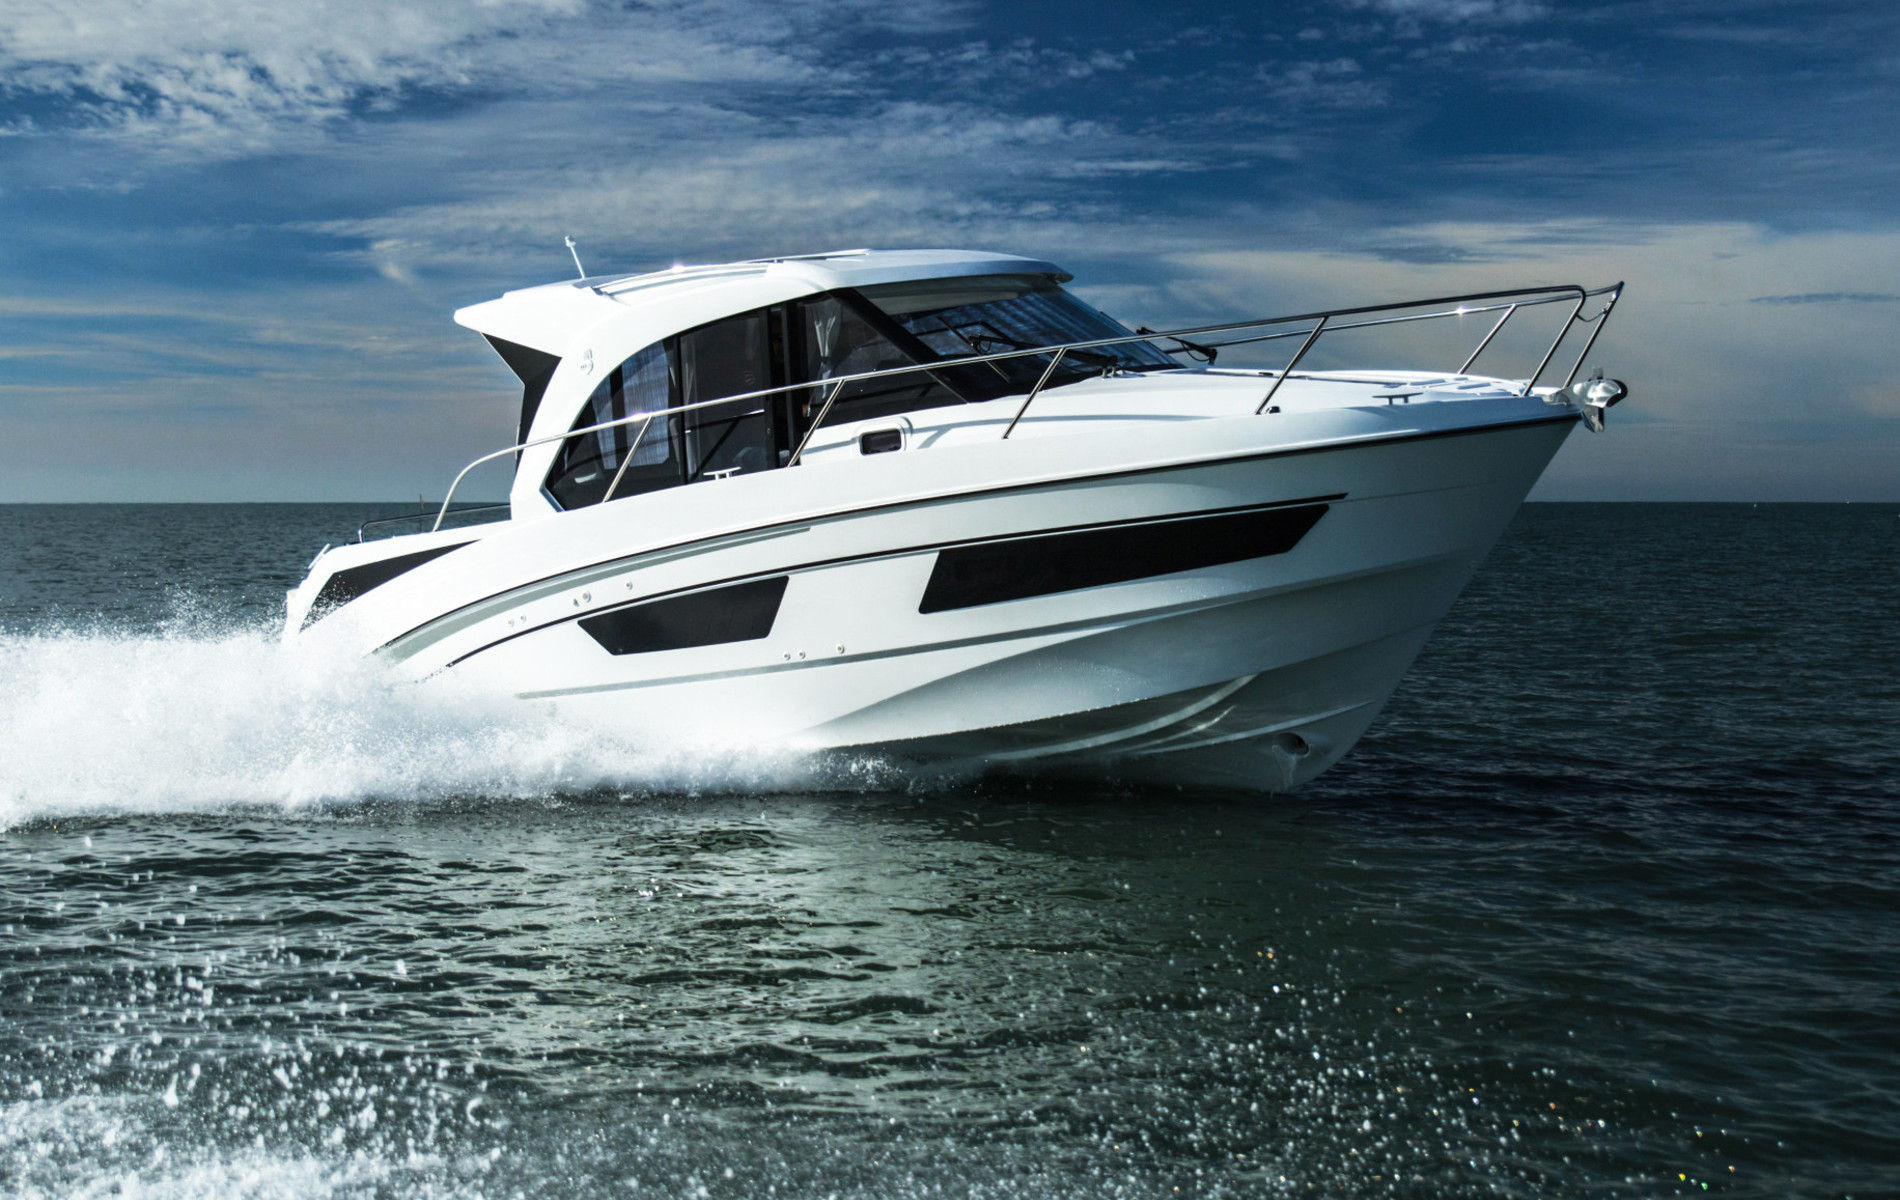 The Antares 9 Outboard by Beneteau Outboard